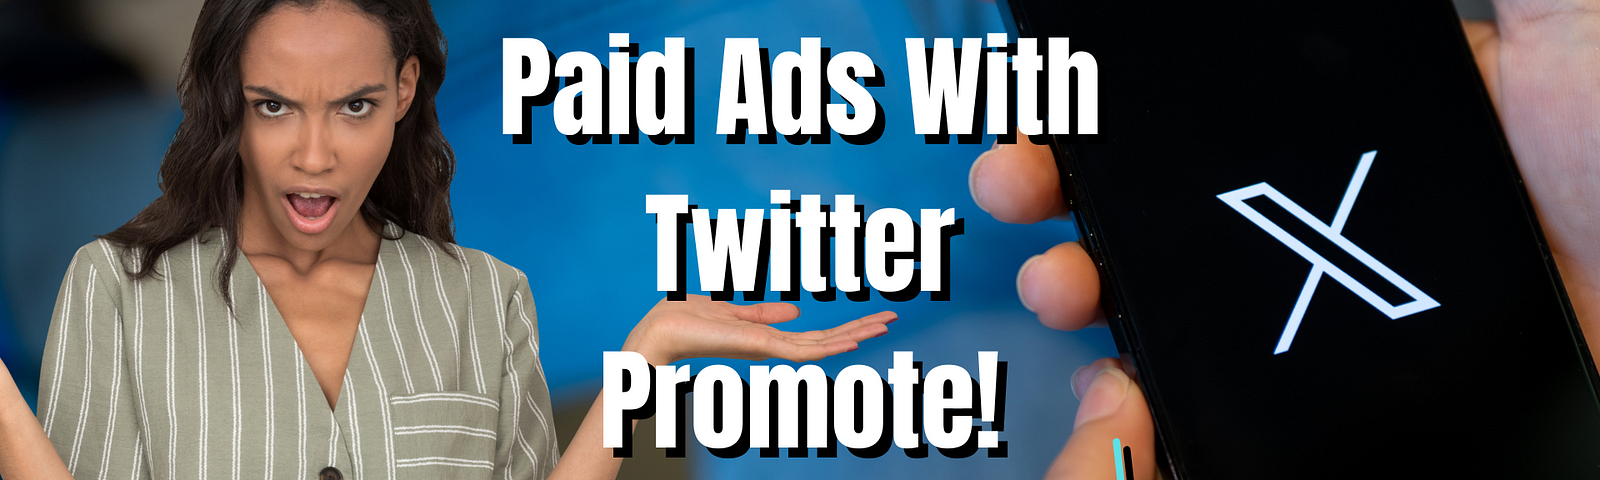 Twitter Promote With Paid Ads For Pennies Generating Sales Medium Story